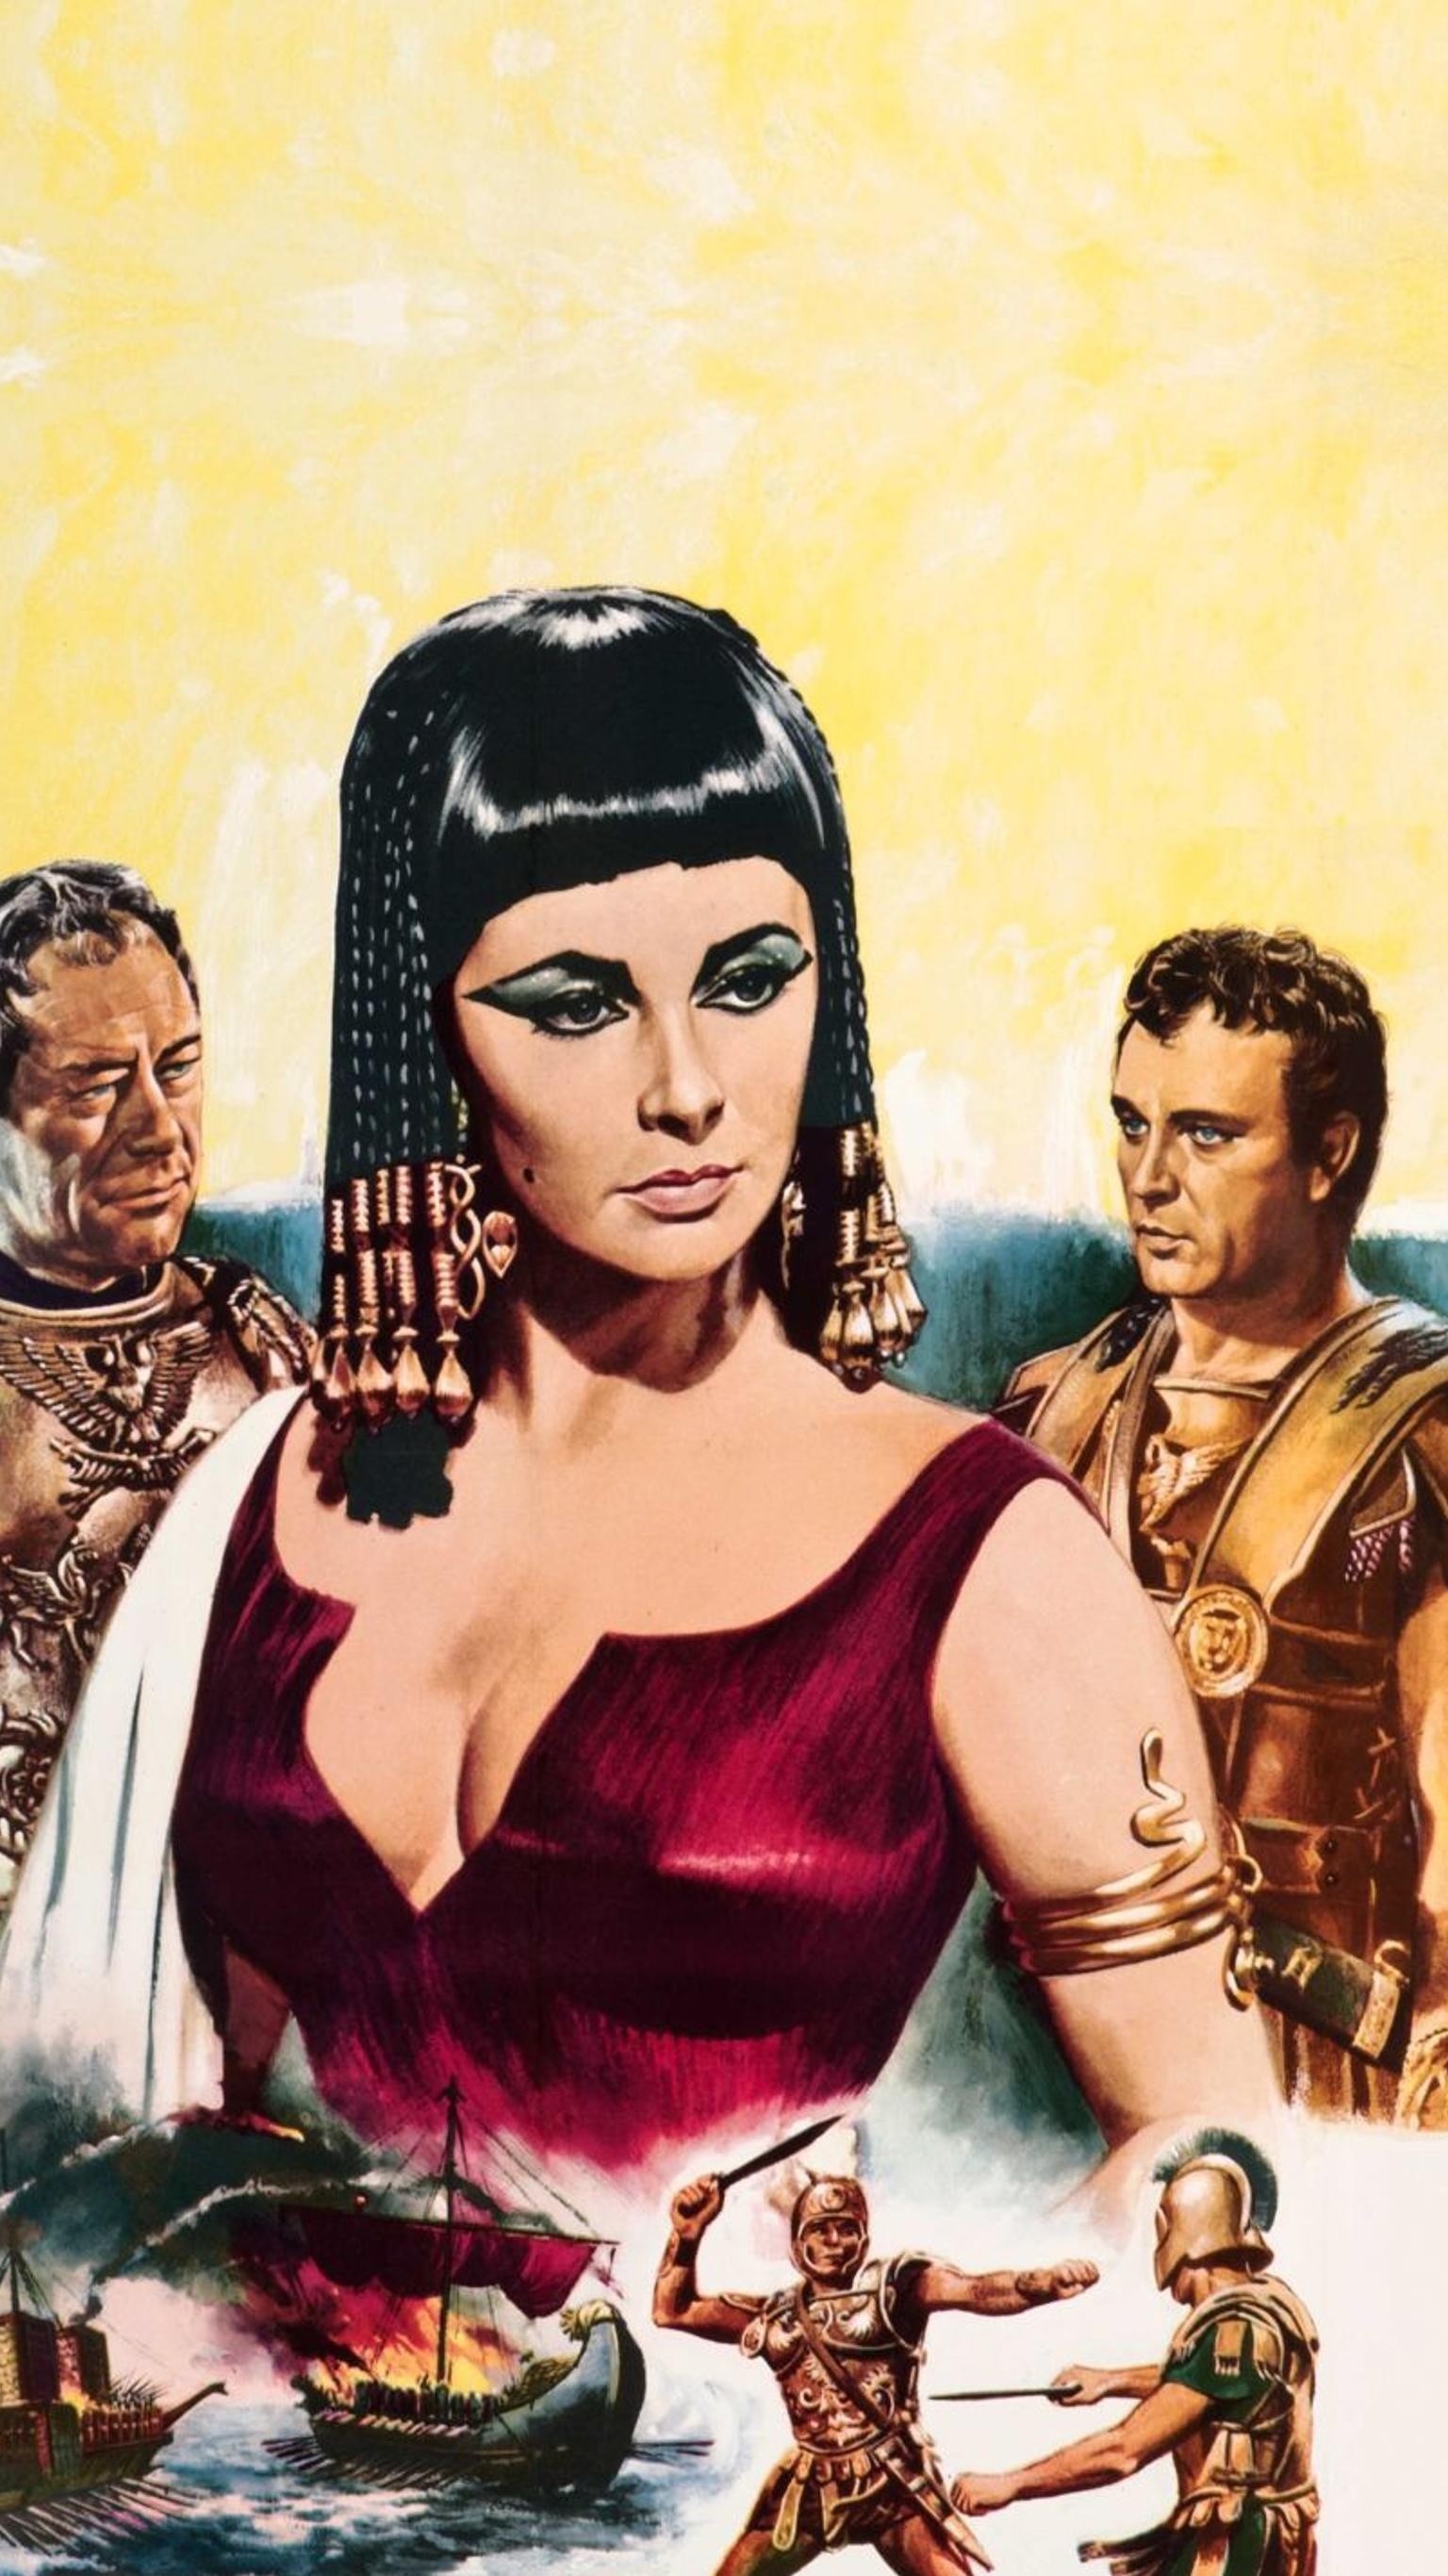 Cleopatra 1963 phone wallpaper, Movie homage, Classic film, Iconic character, 1540x2740 HD Handy